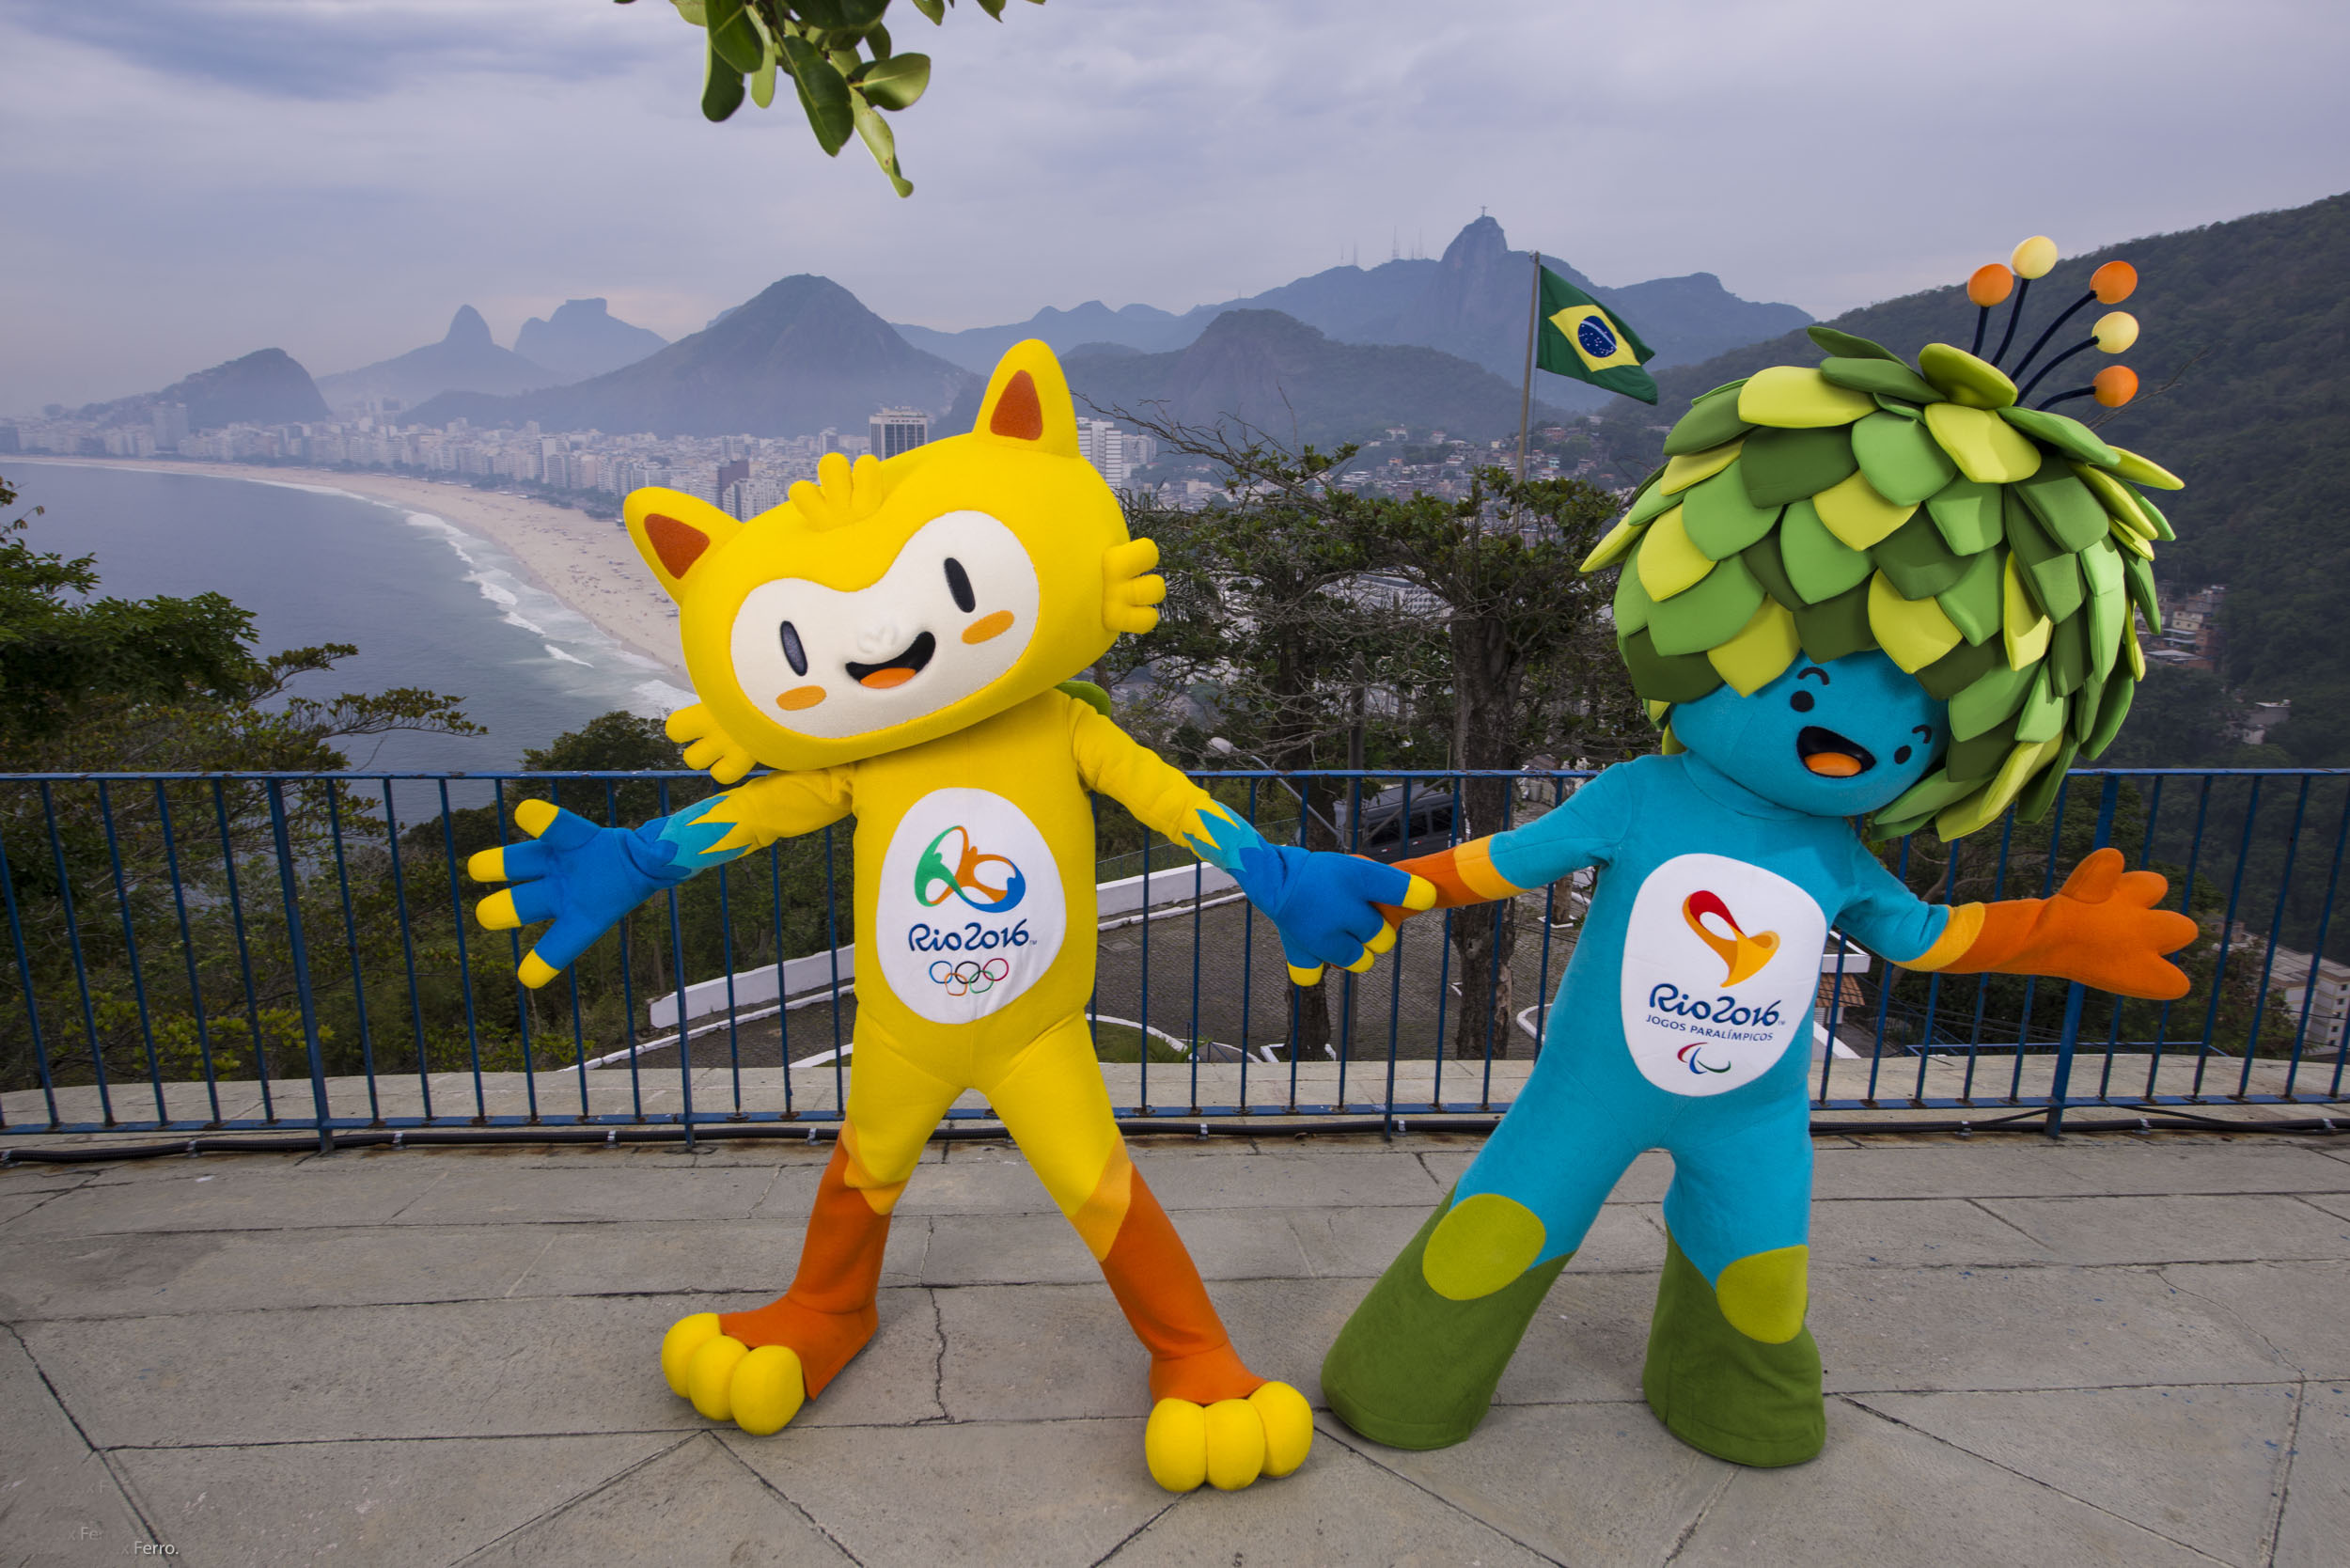 Rio S 16 Olympic Mascot Looks Like Anderson Varejao For The Win